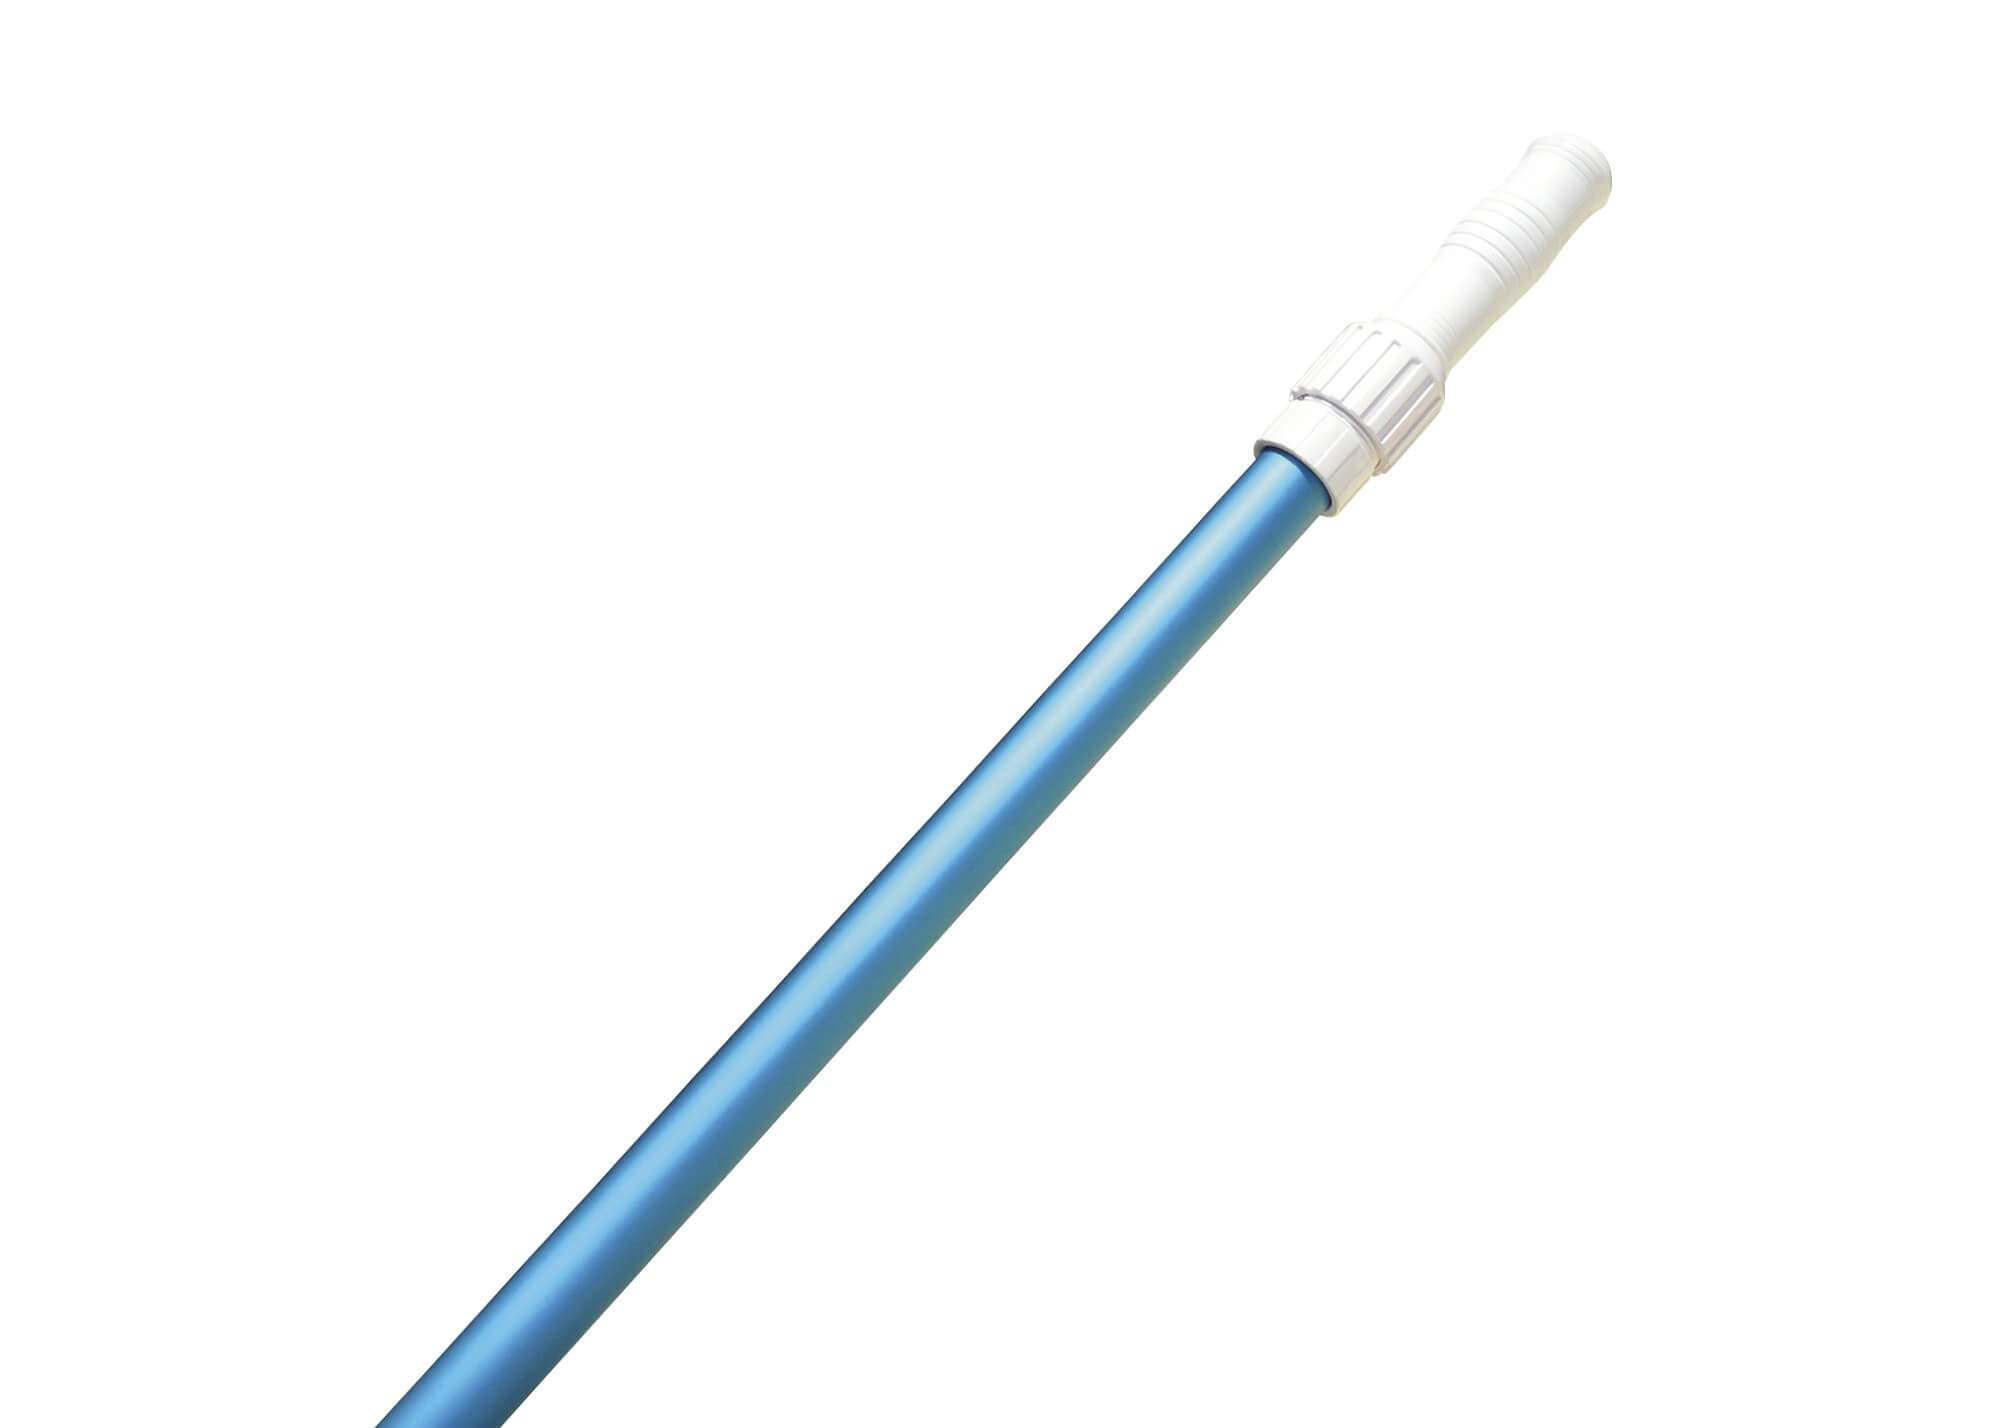 Telescopic handle from 1m80 to 3m60 in two parts.